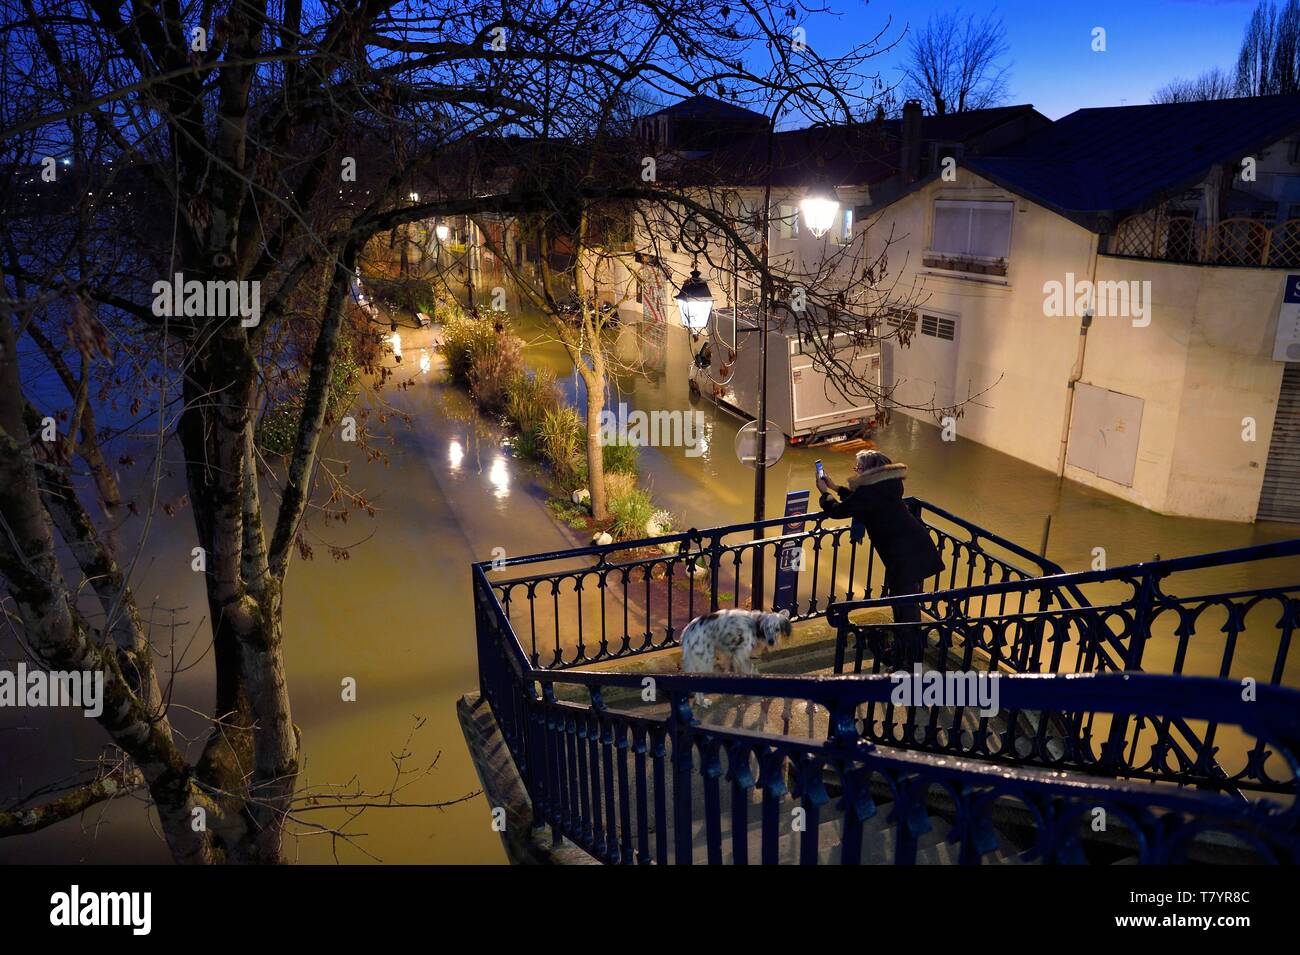 France, Val de Marne, Le Perreux sur Marne, the Marne riverside flooded from the footbridge coming from Bry sur Marne Stock Photo